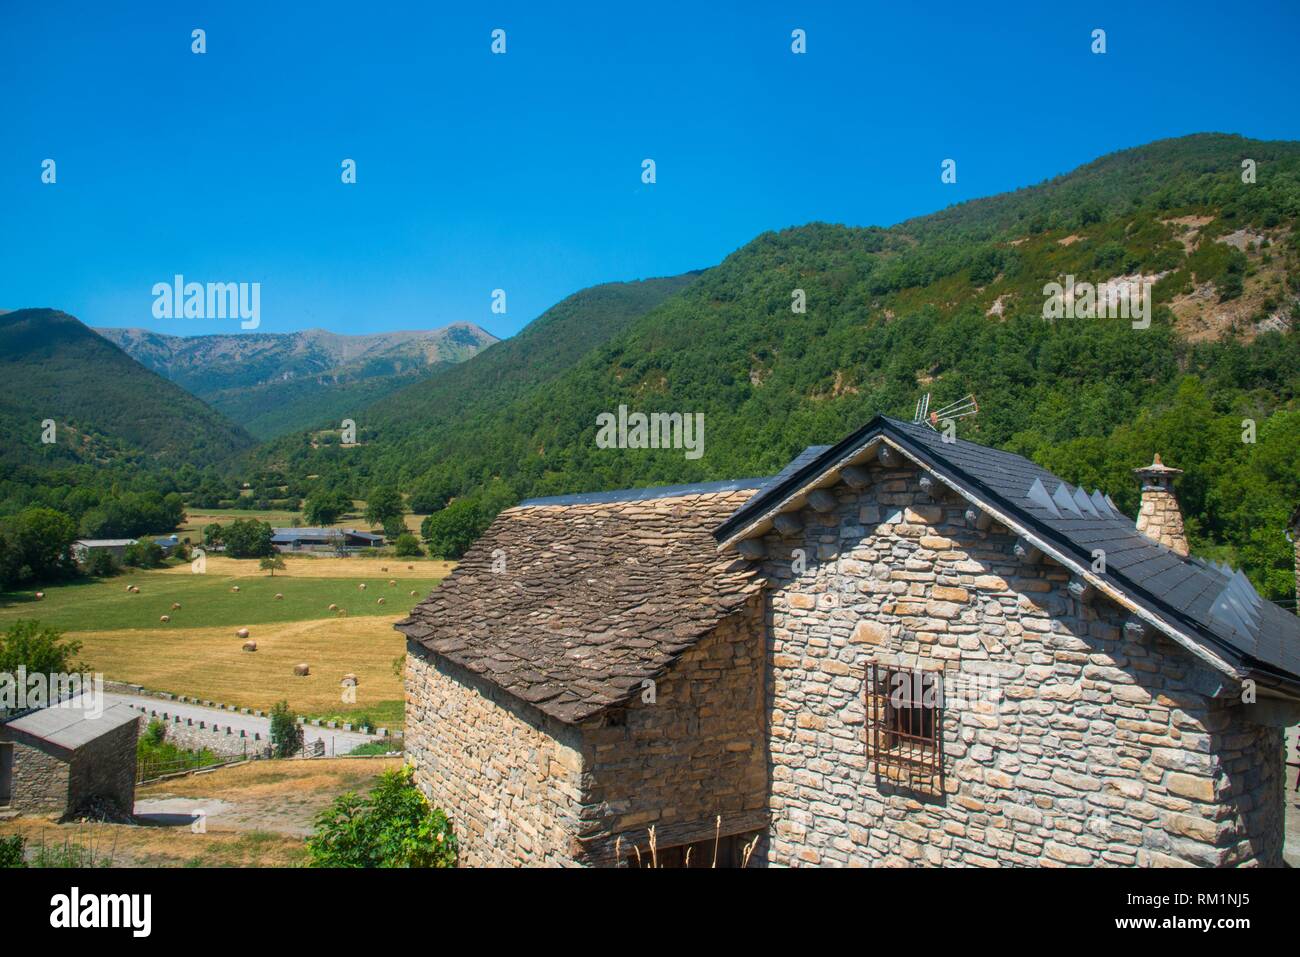 House and landscape of Broto valley. Oto, Huesca province, Aragon, Spain. Stock Photo